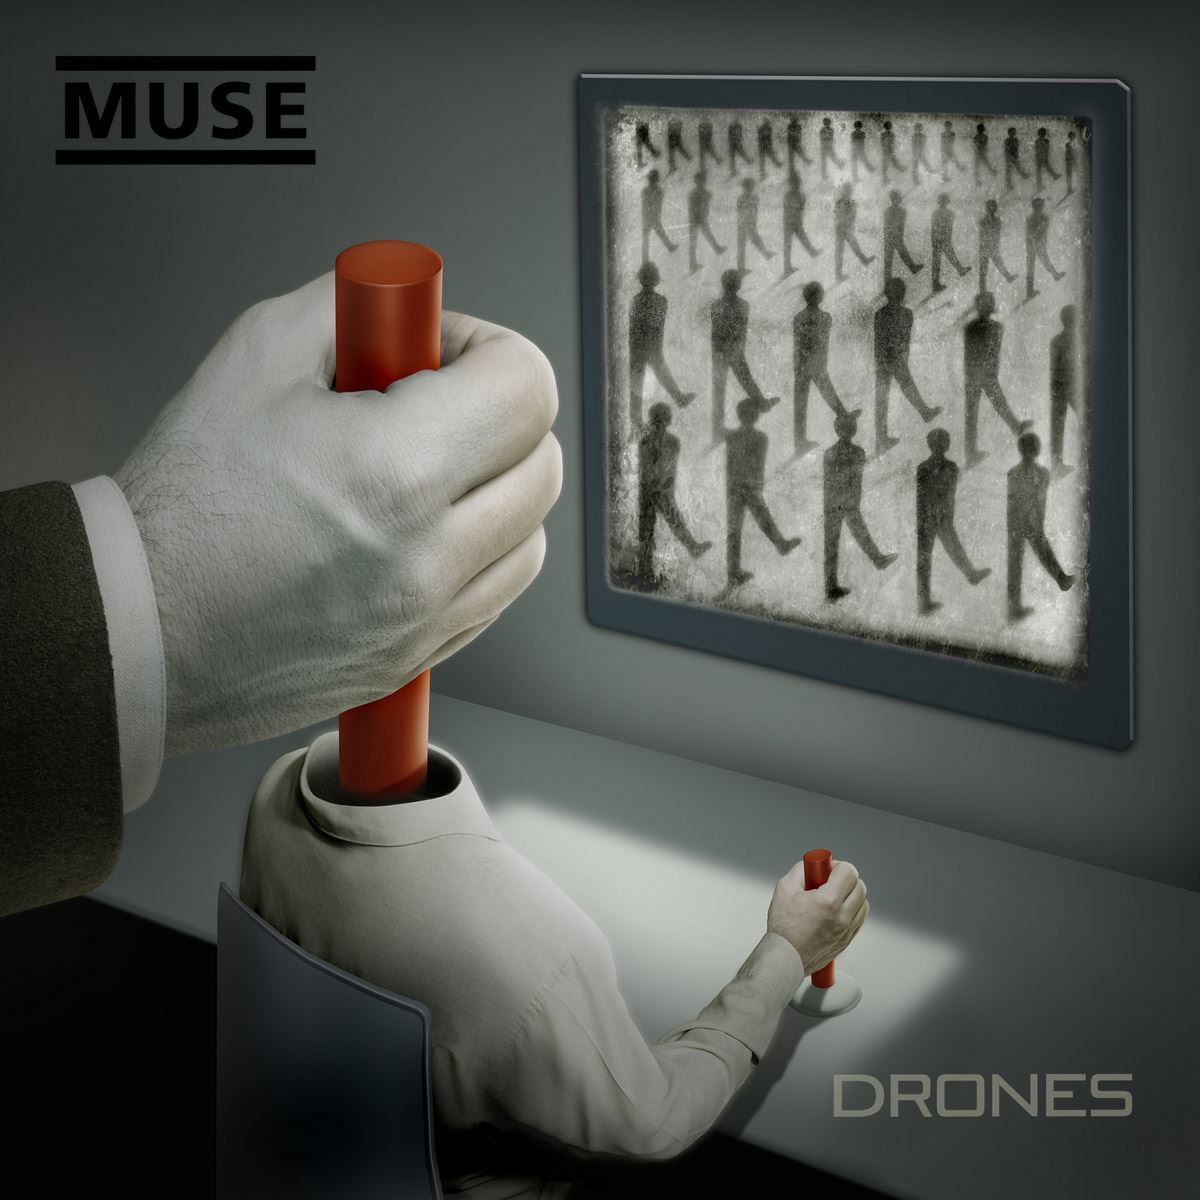 CD Muse-Drones